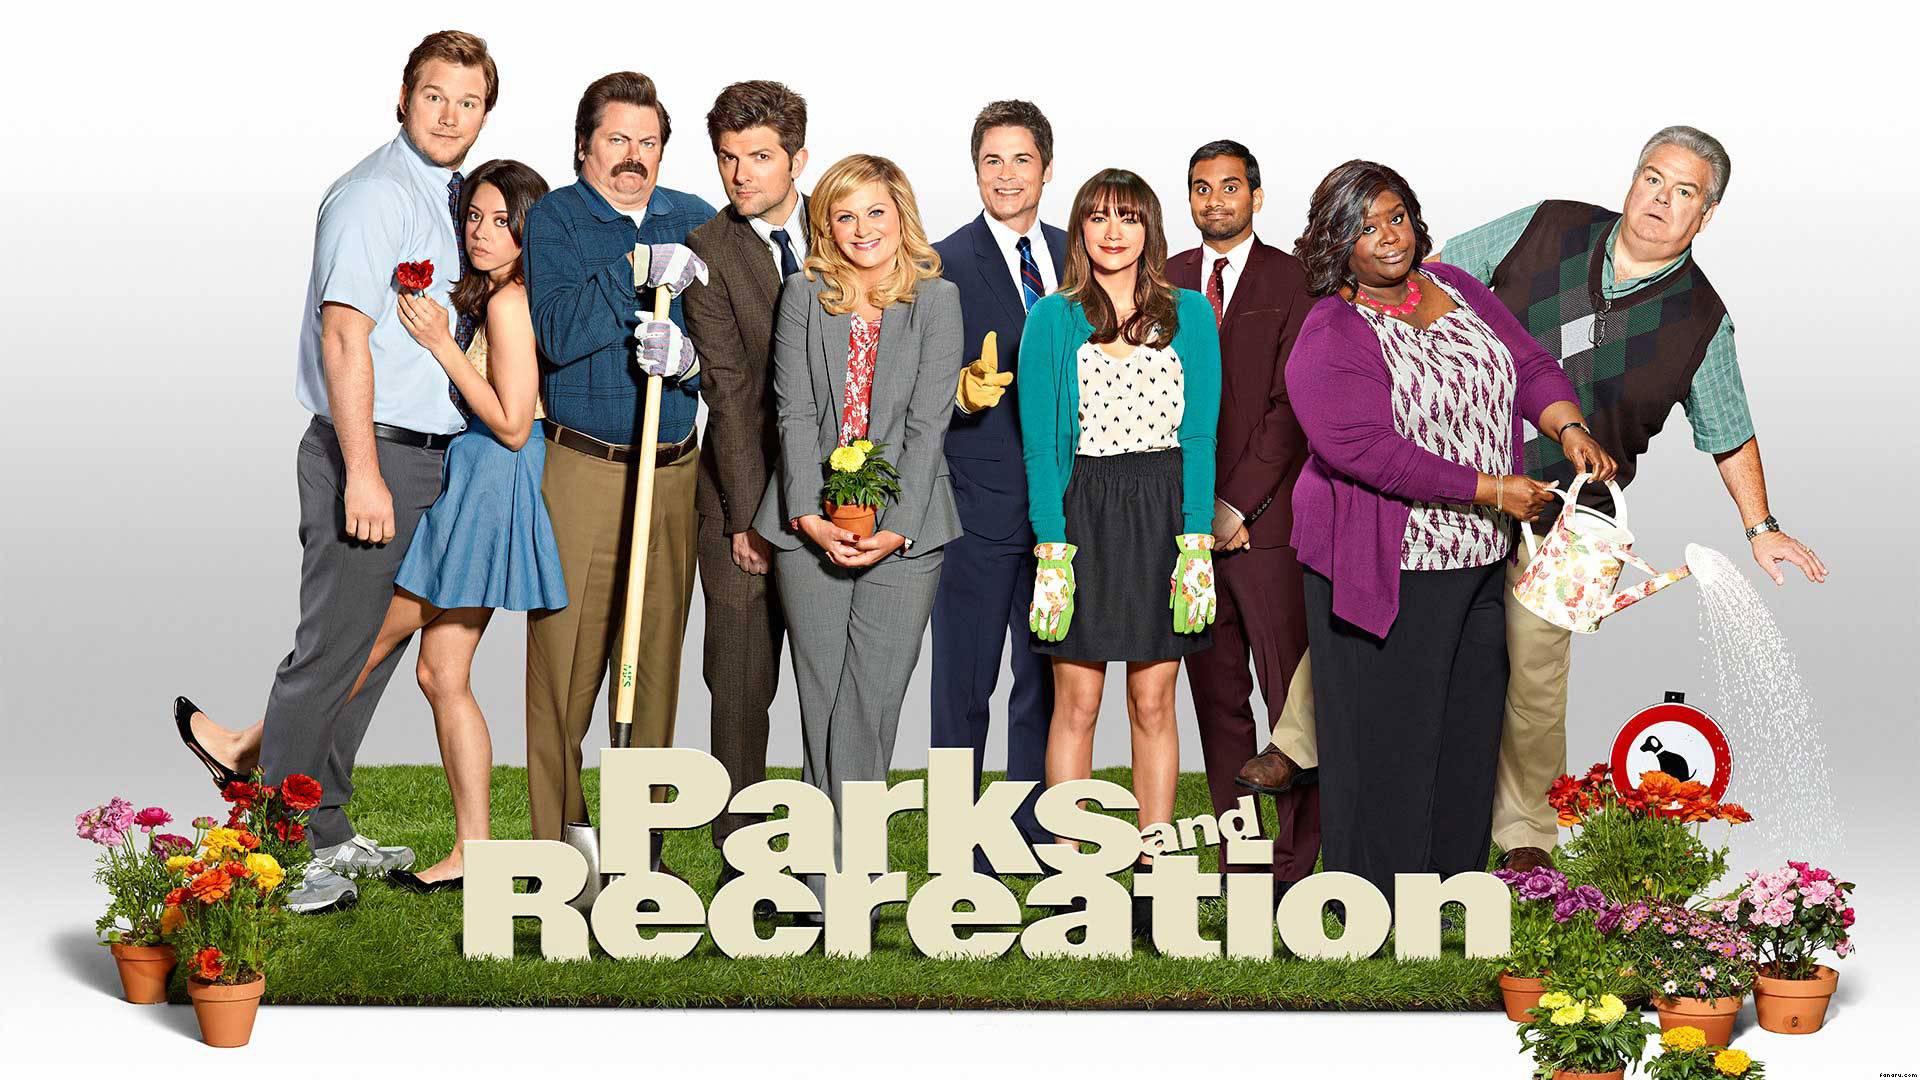 The secrets of Parks and Recreation